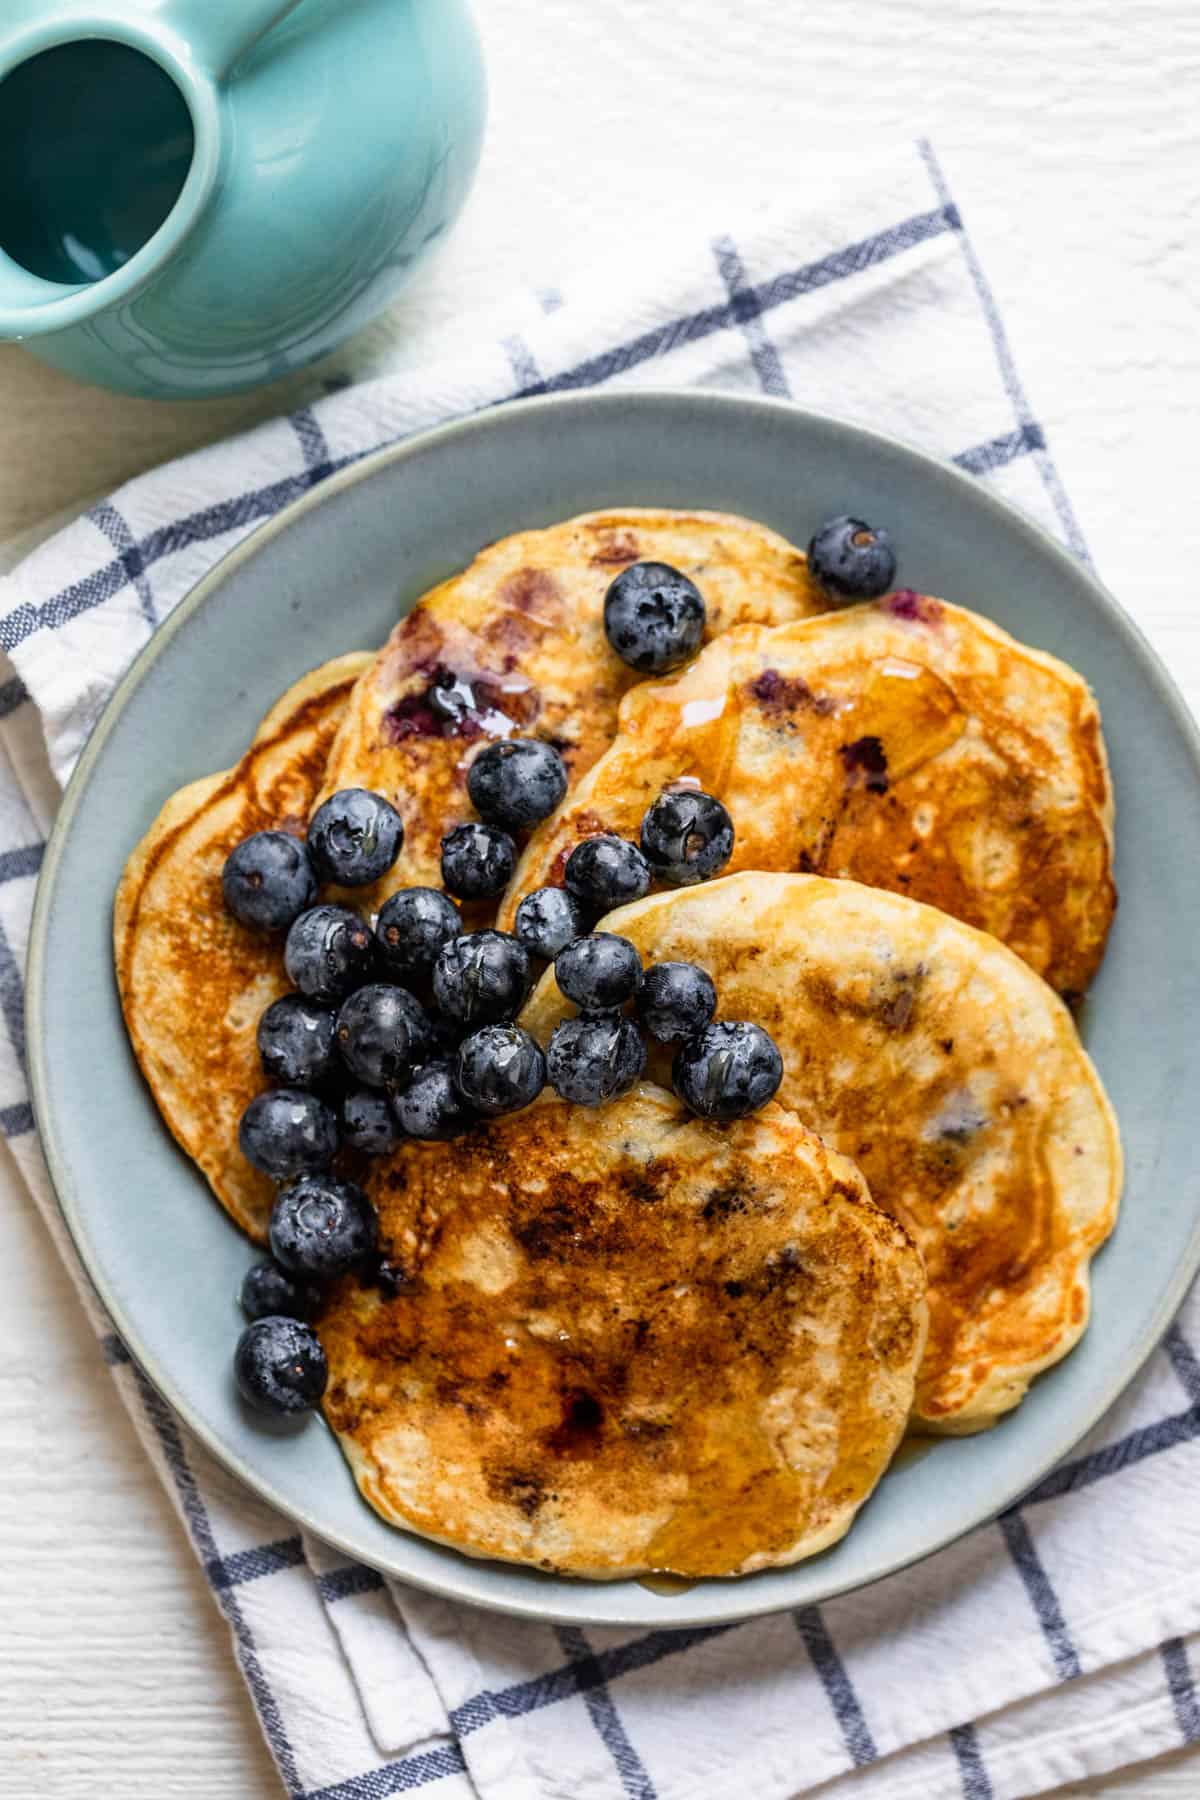 Plate of blueberry pancakes served with maple syrup